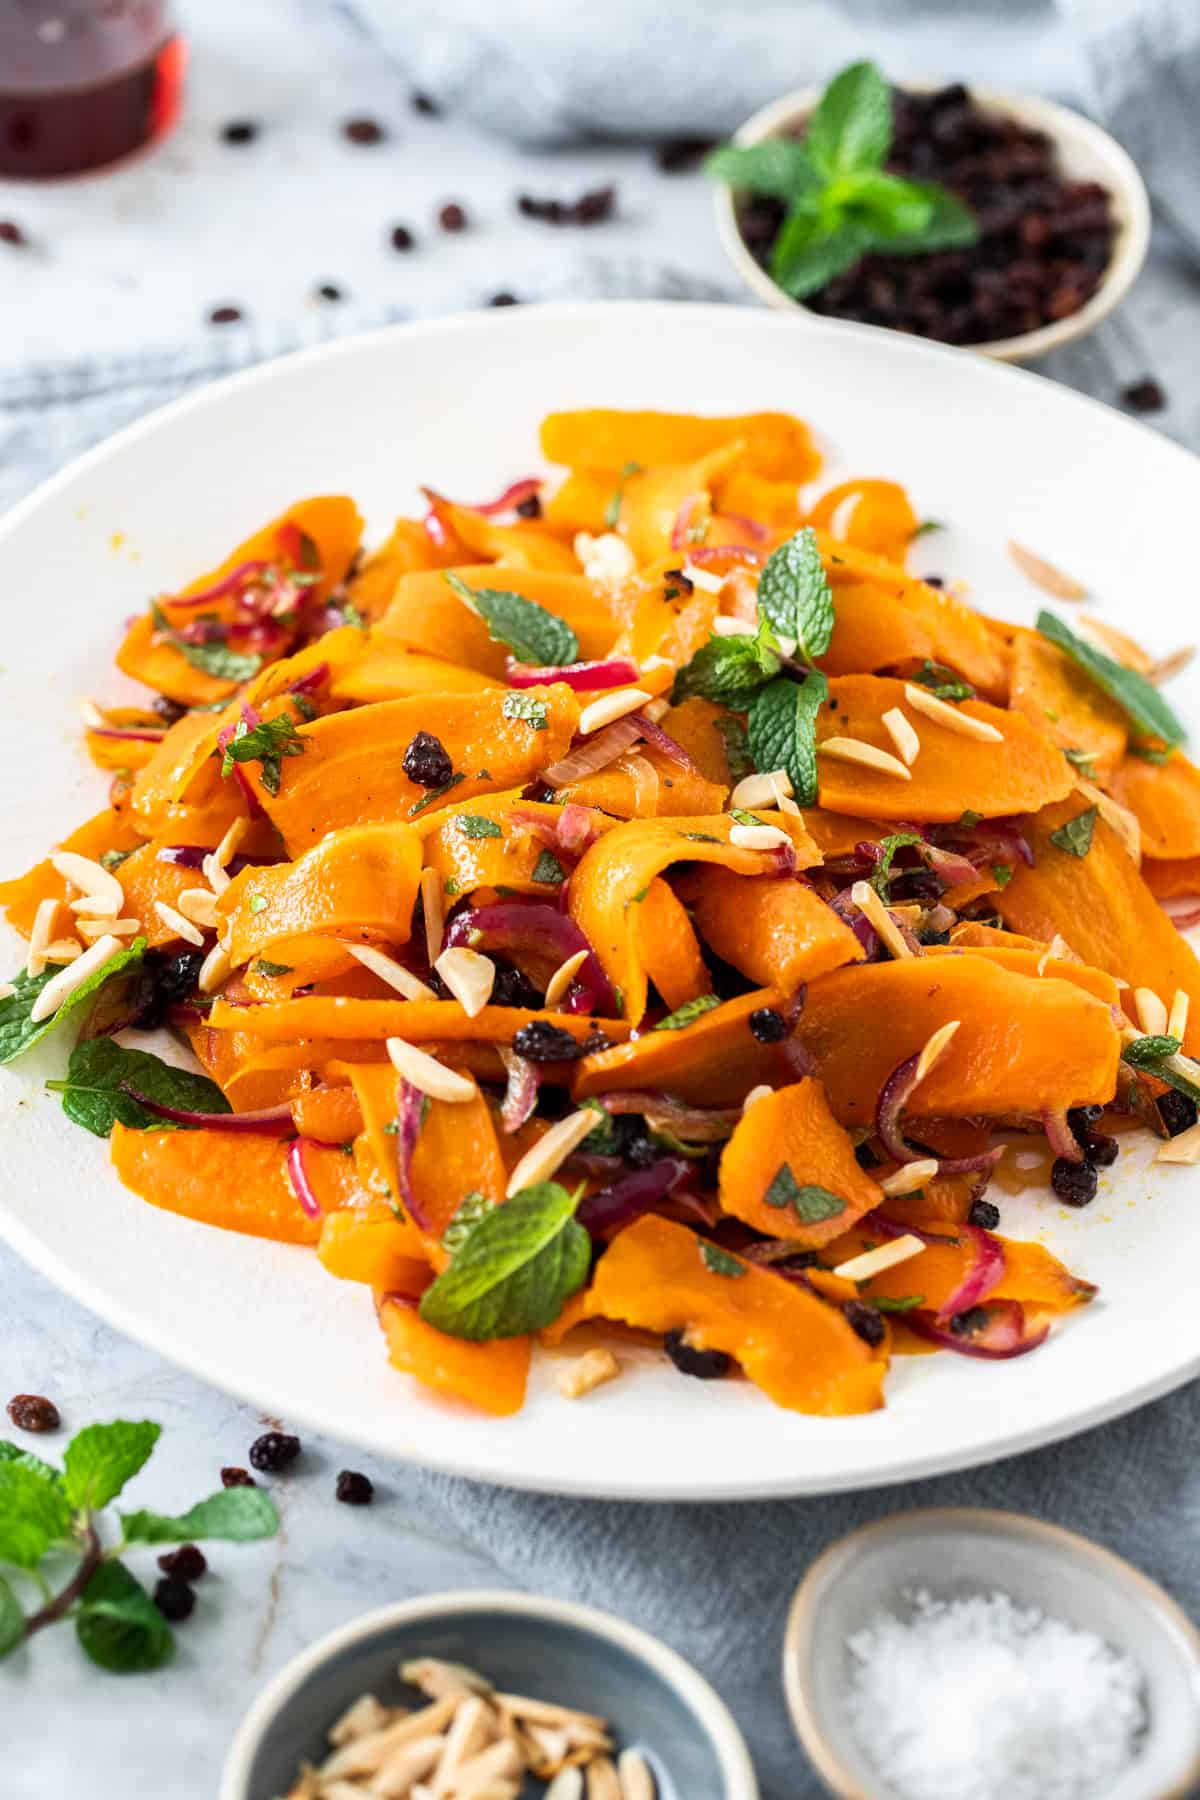 Round white dish of carrot salad, garnished with slivered almonds and mint leaves.